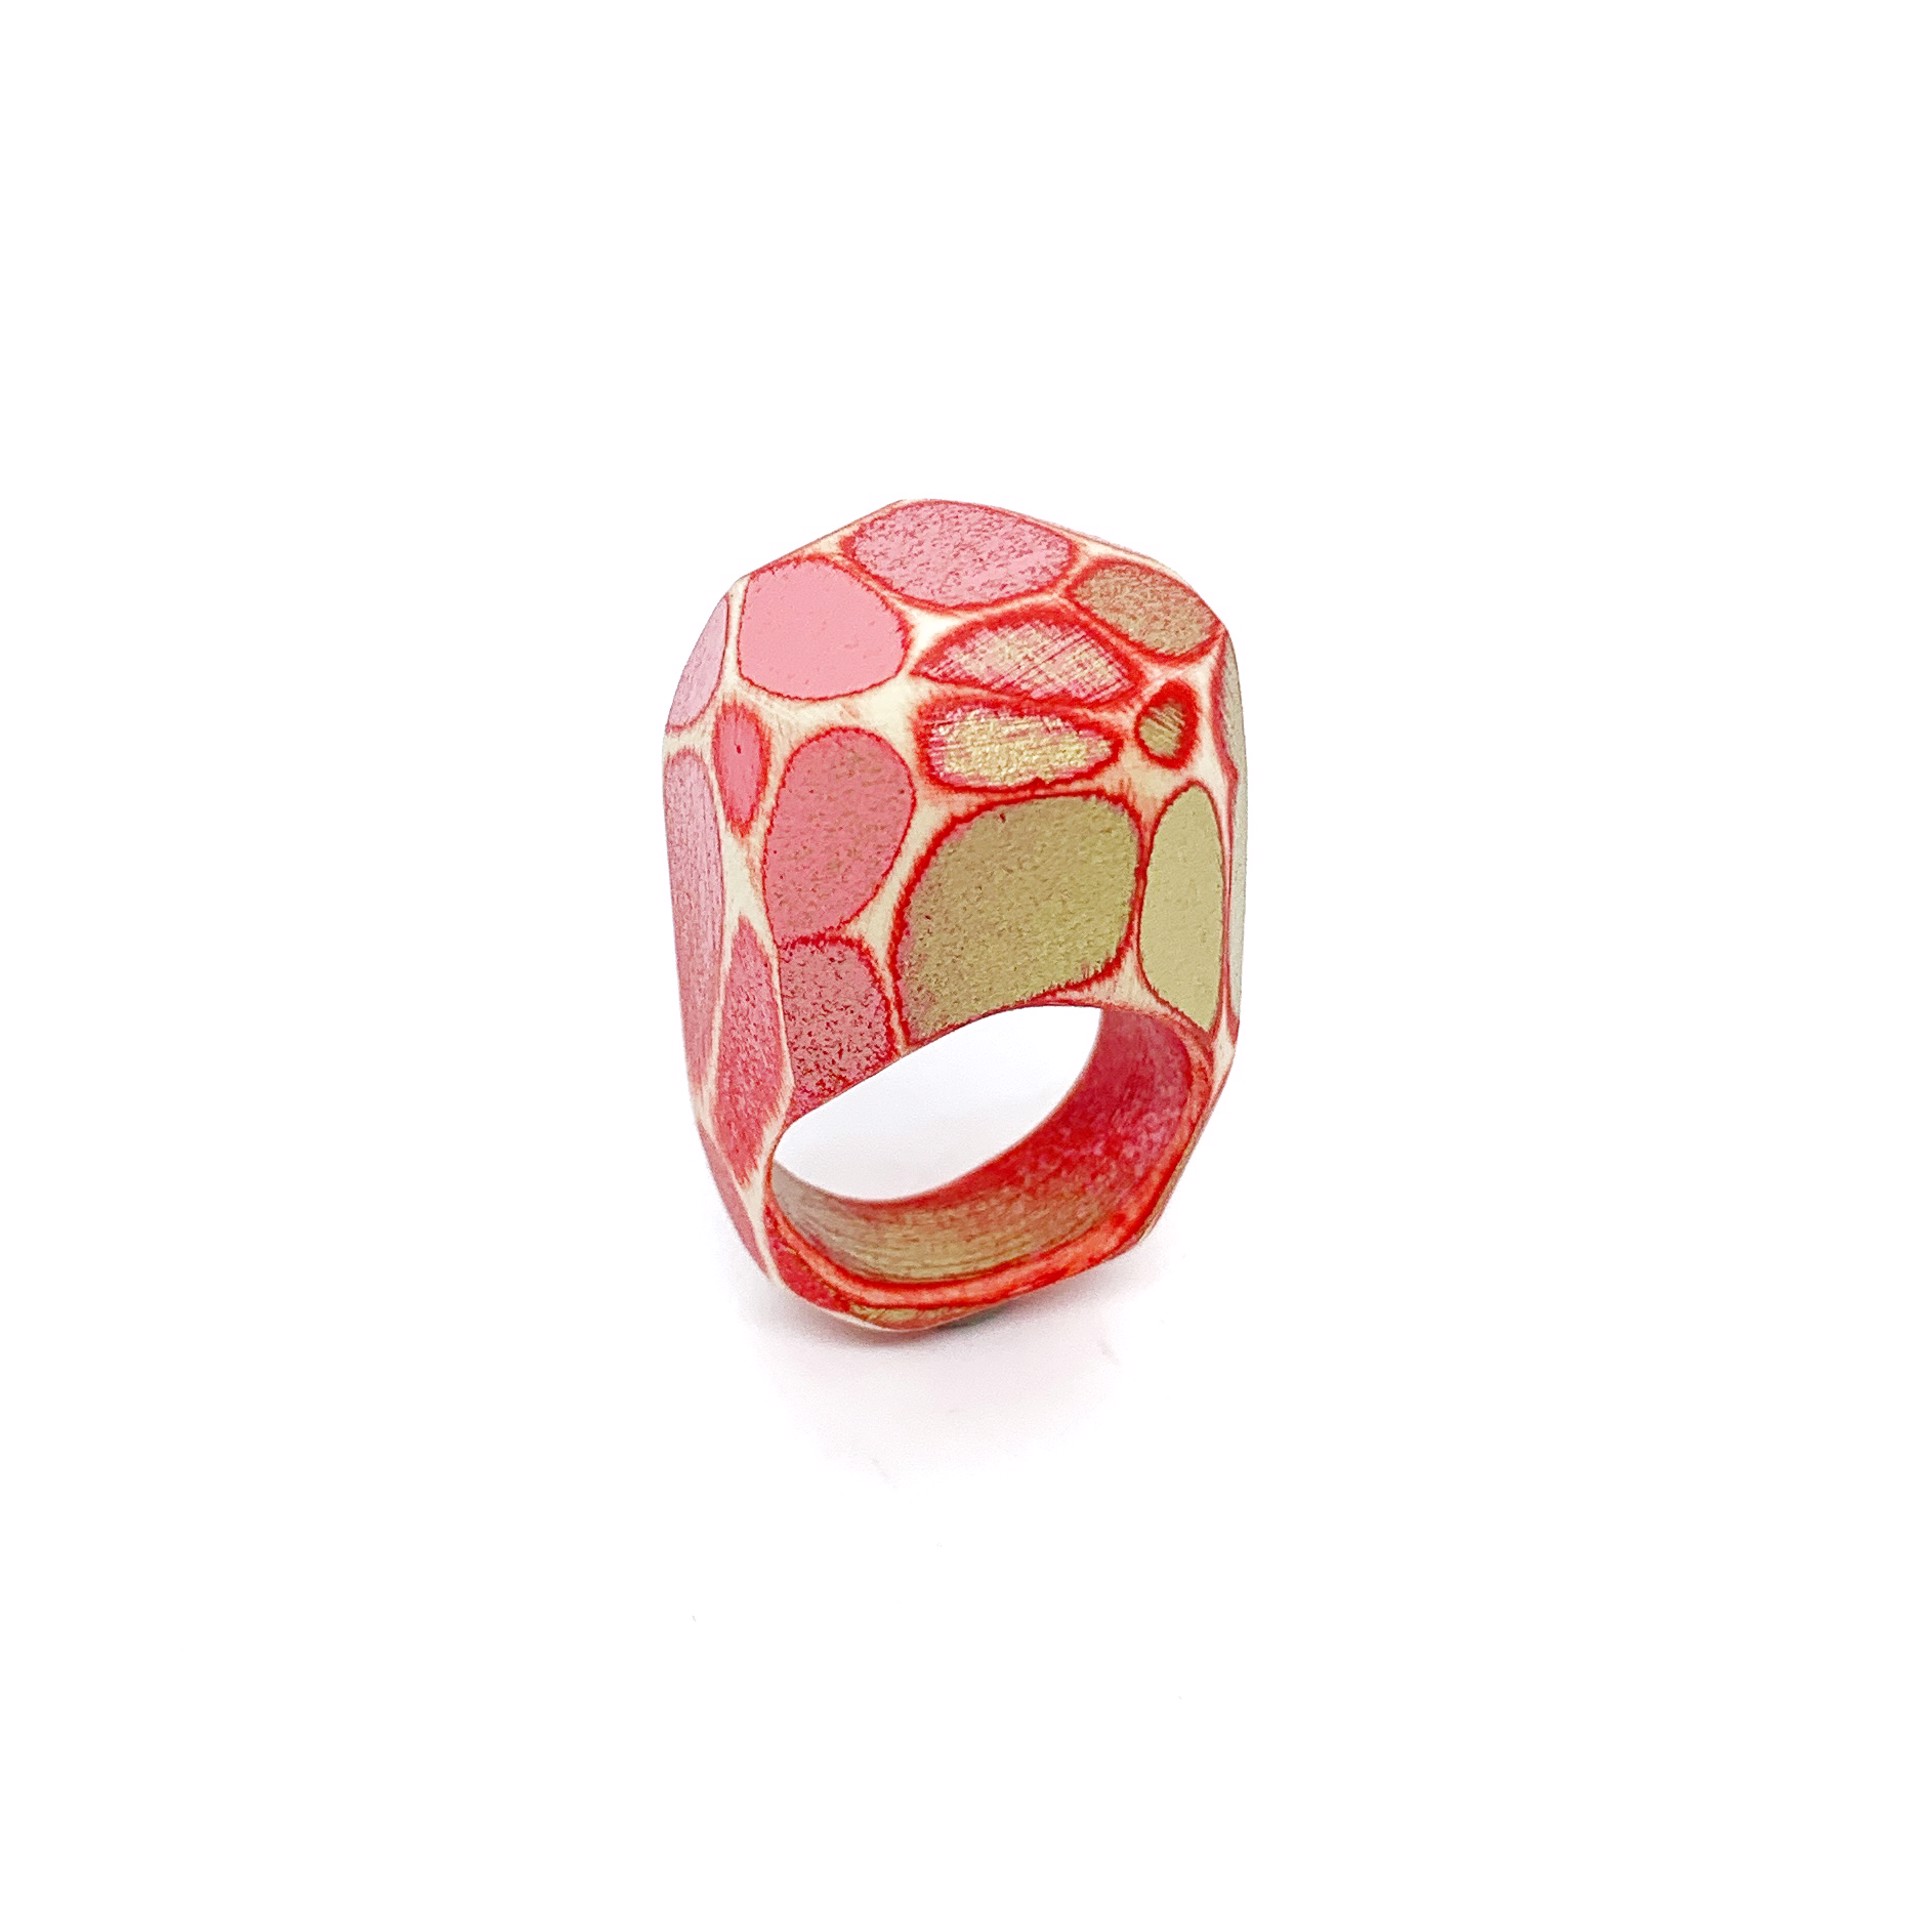 Multifaceted Ring (chunky) by Bad Habits by Morgan Hill